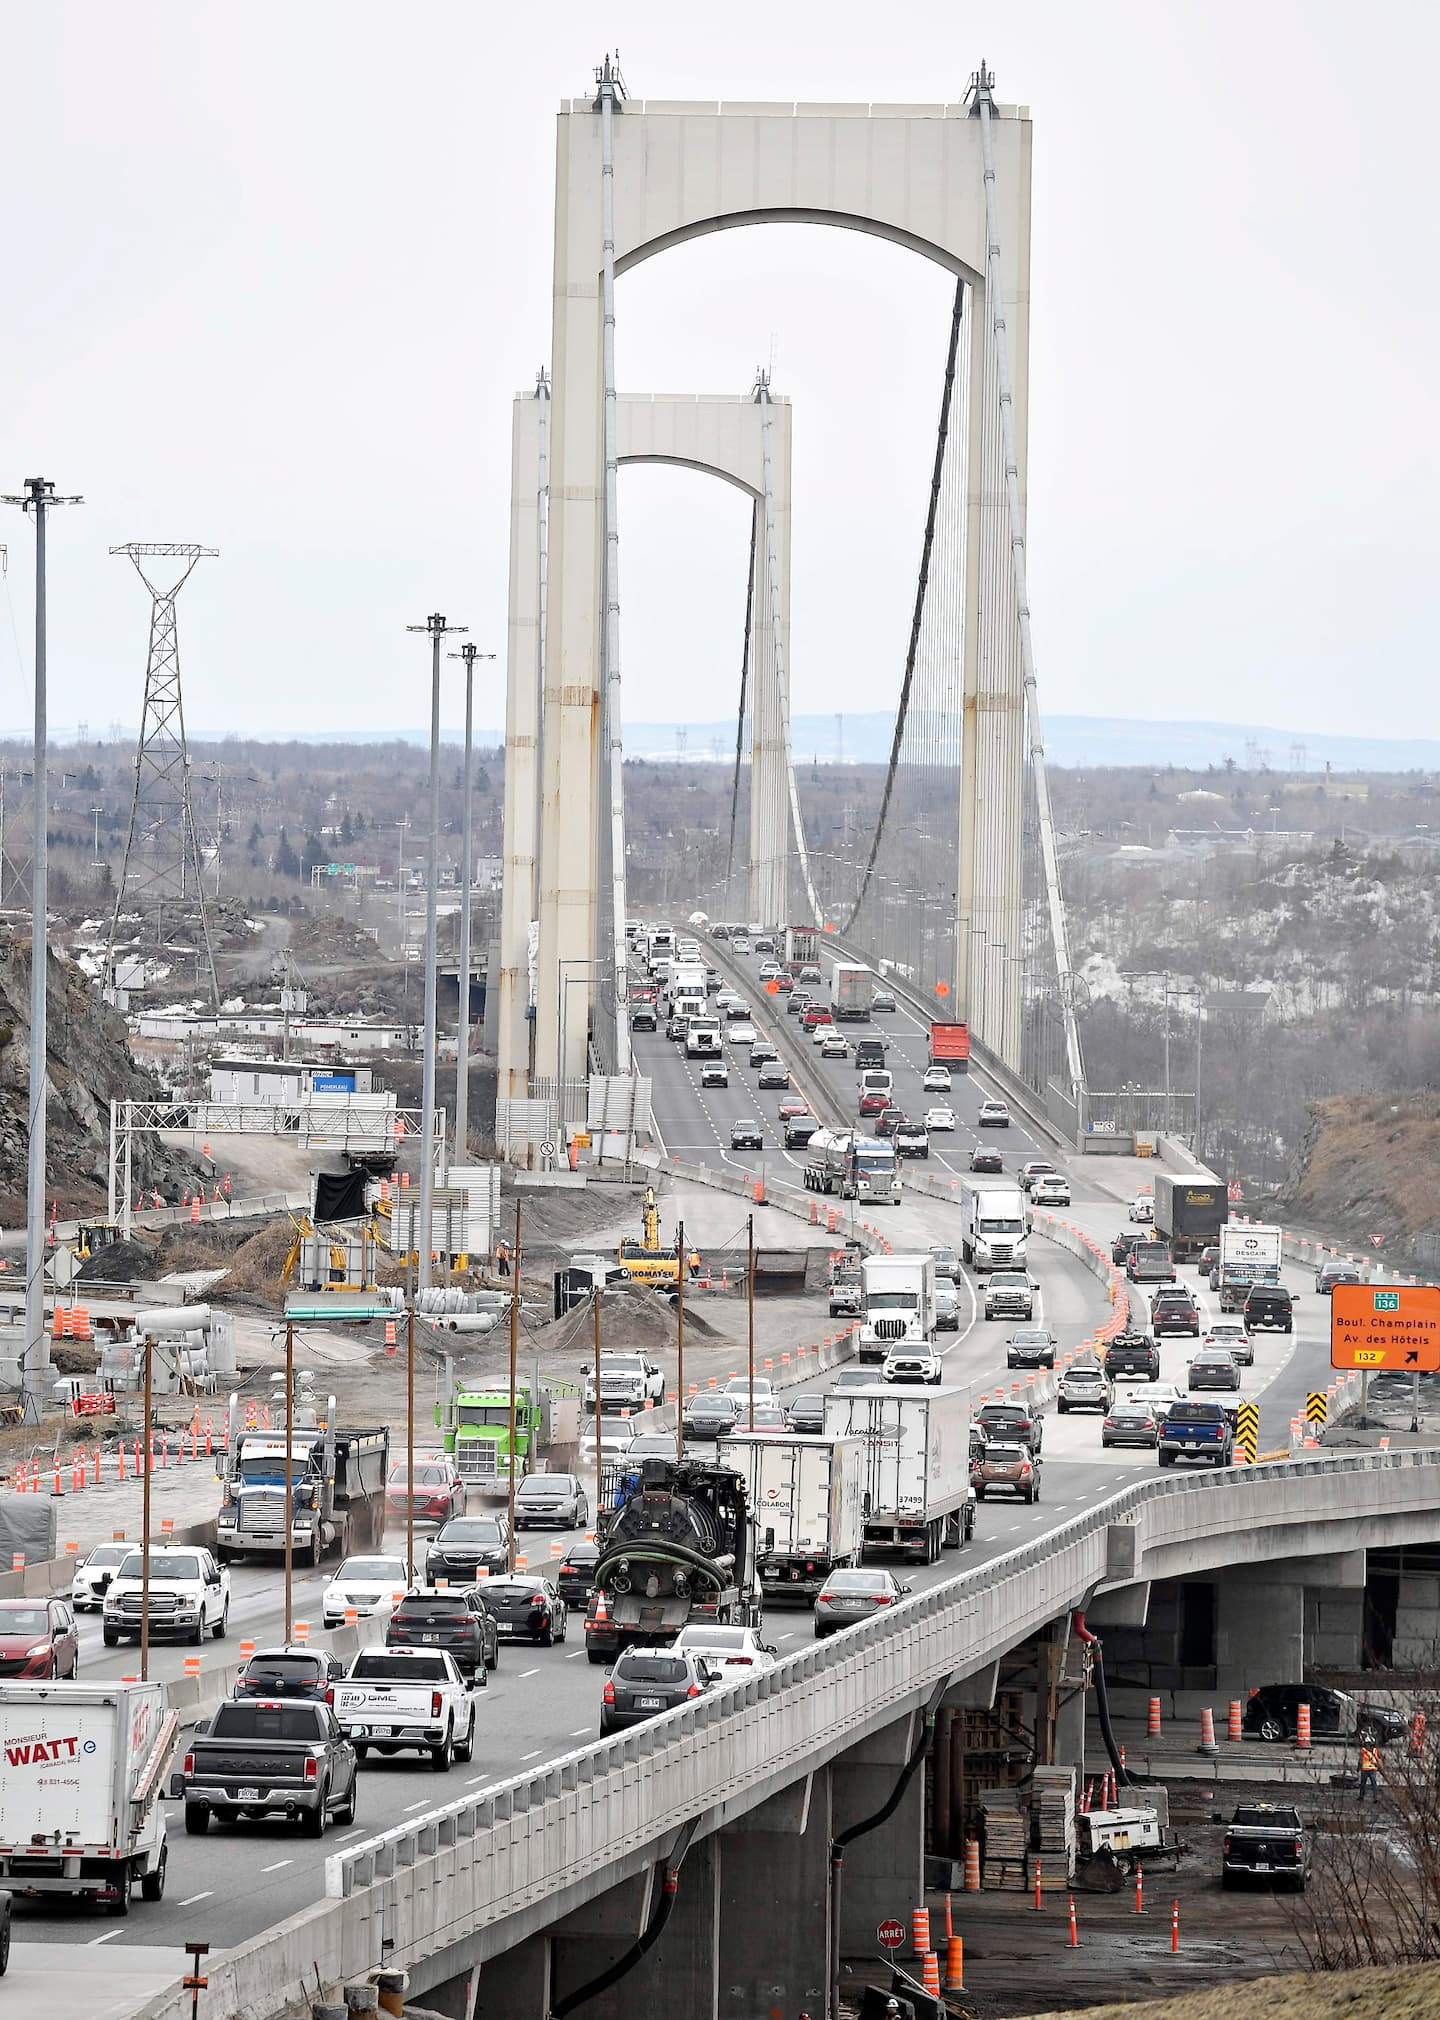 Report on the sunk Pierre-Laporte bridge to the media: the MTQ launches an investigation